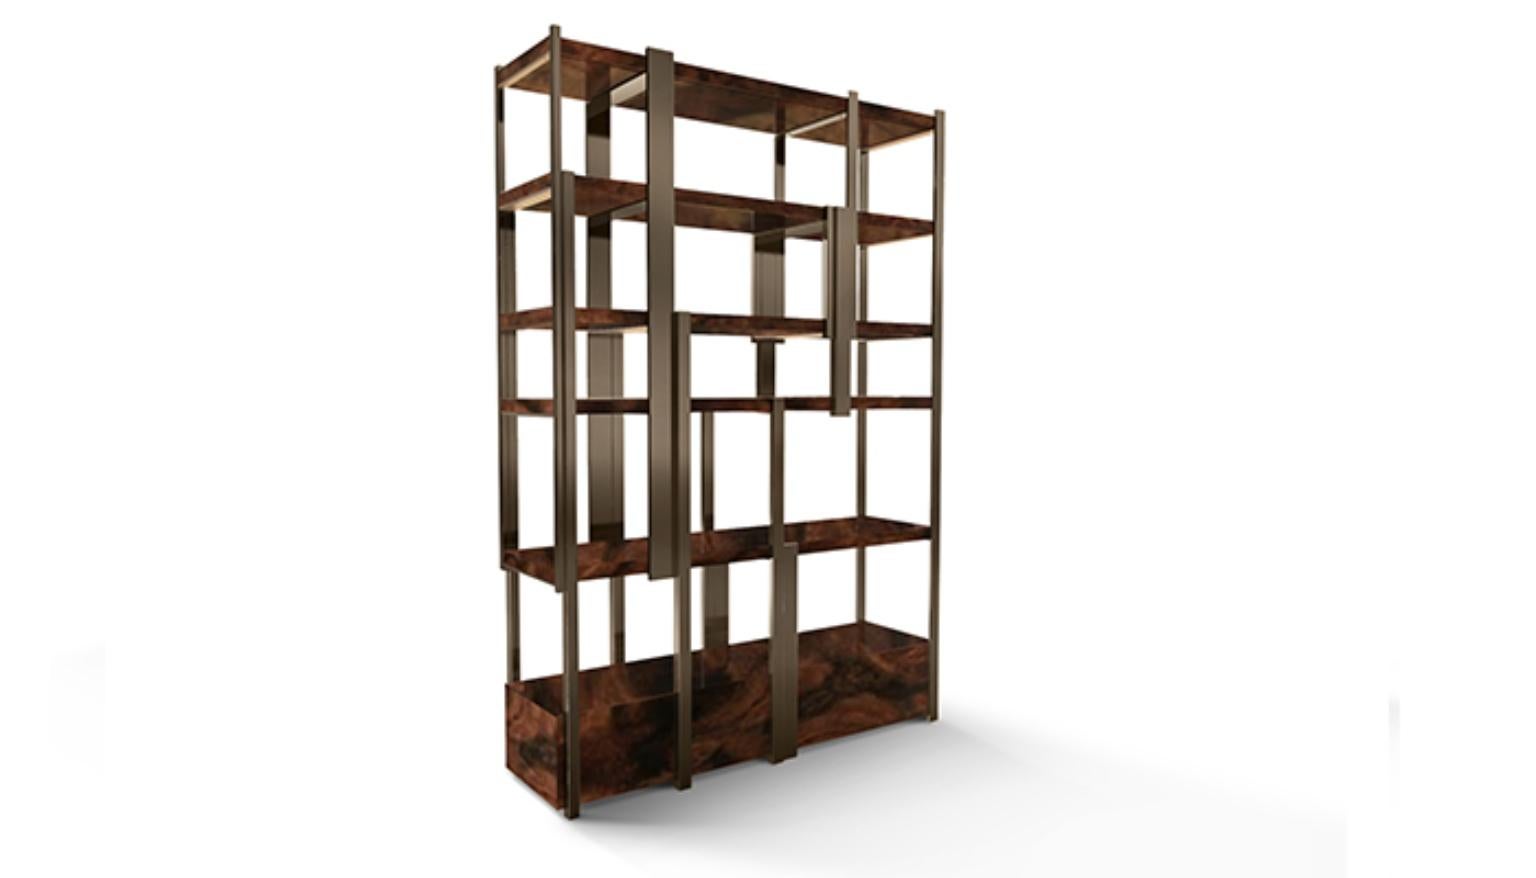 Portuguese Contemporary Modern Caffeine Walnut Root Veneer Bookcase by Caffe Latte For Sale